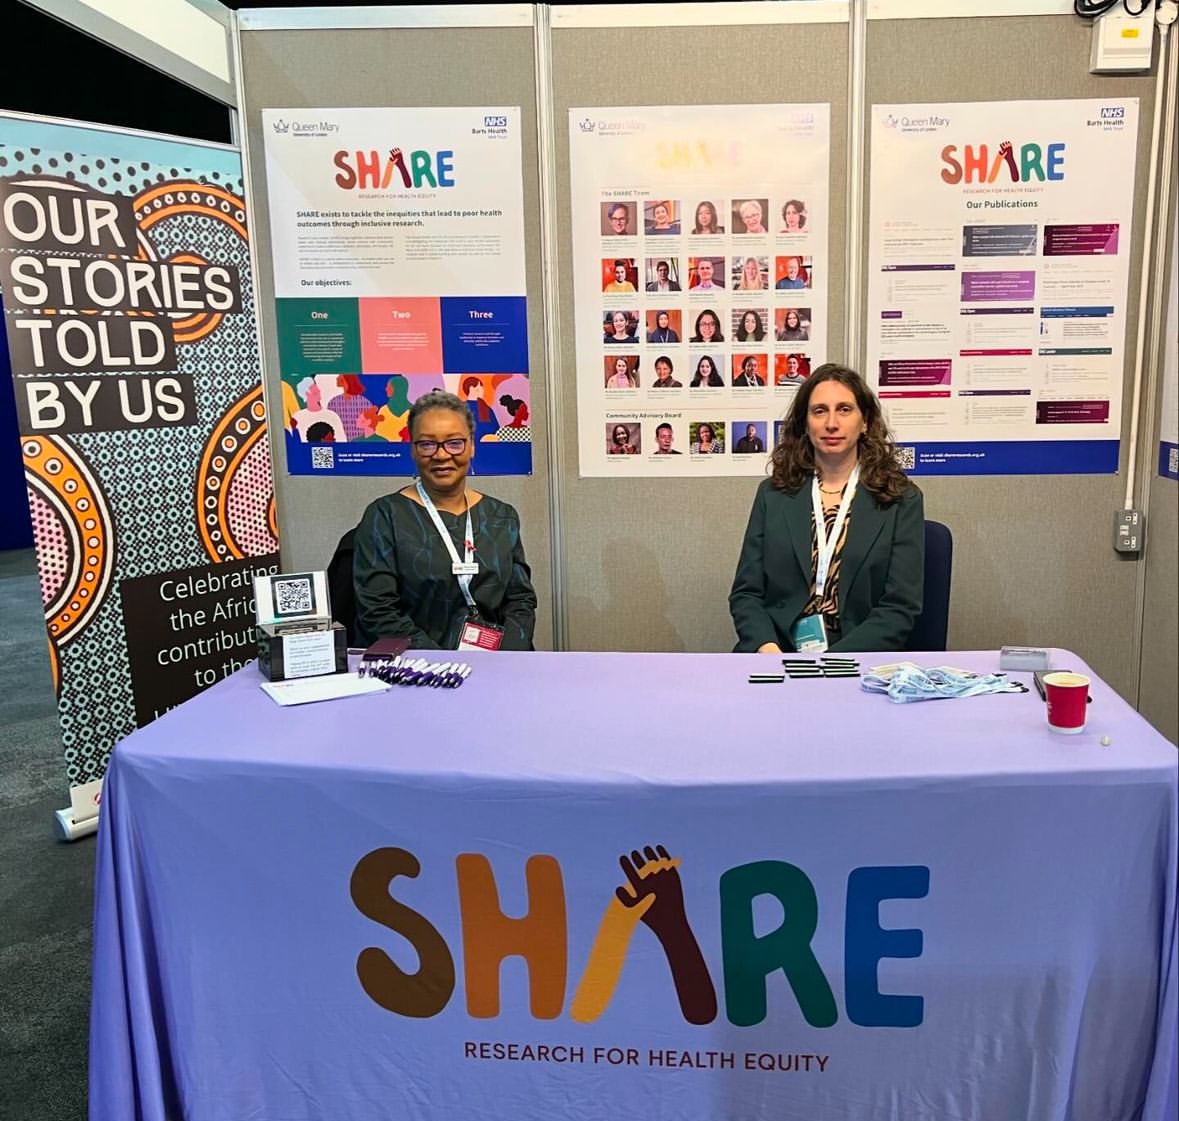 Good morning from #BHIVA24! We will be at our stand all conference - come and chat to us about our work! Here’s @Bex_Mbewe @sara_paparini this morning.